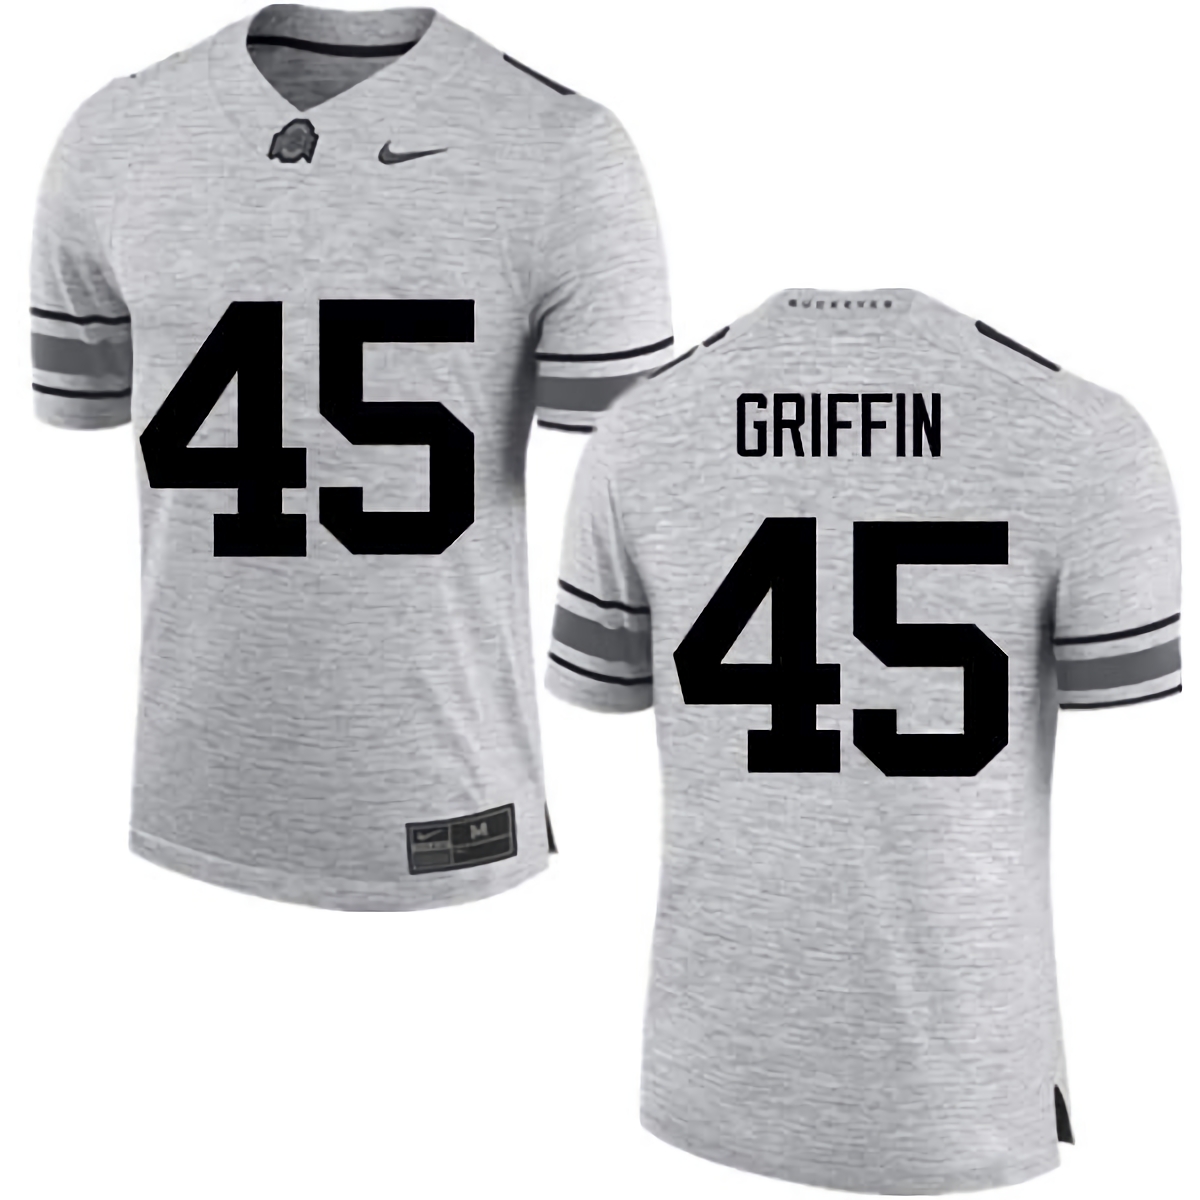 Archie Griffin Ohio State Buckeyes Men's NCAA #45 Nike Gray College Stitched Football Jersey TDH5256EY